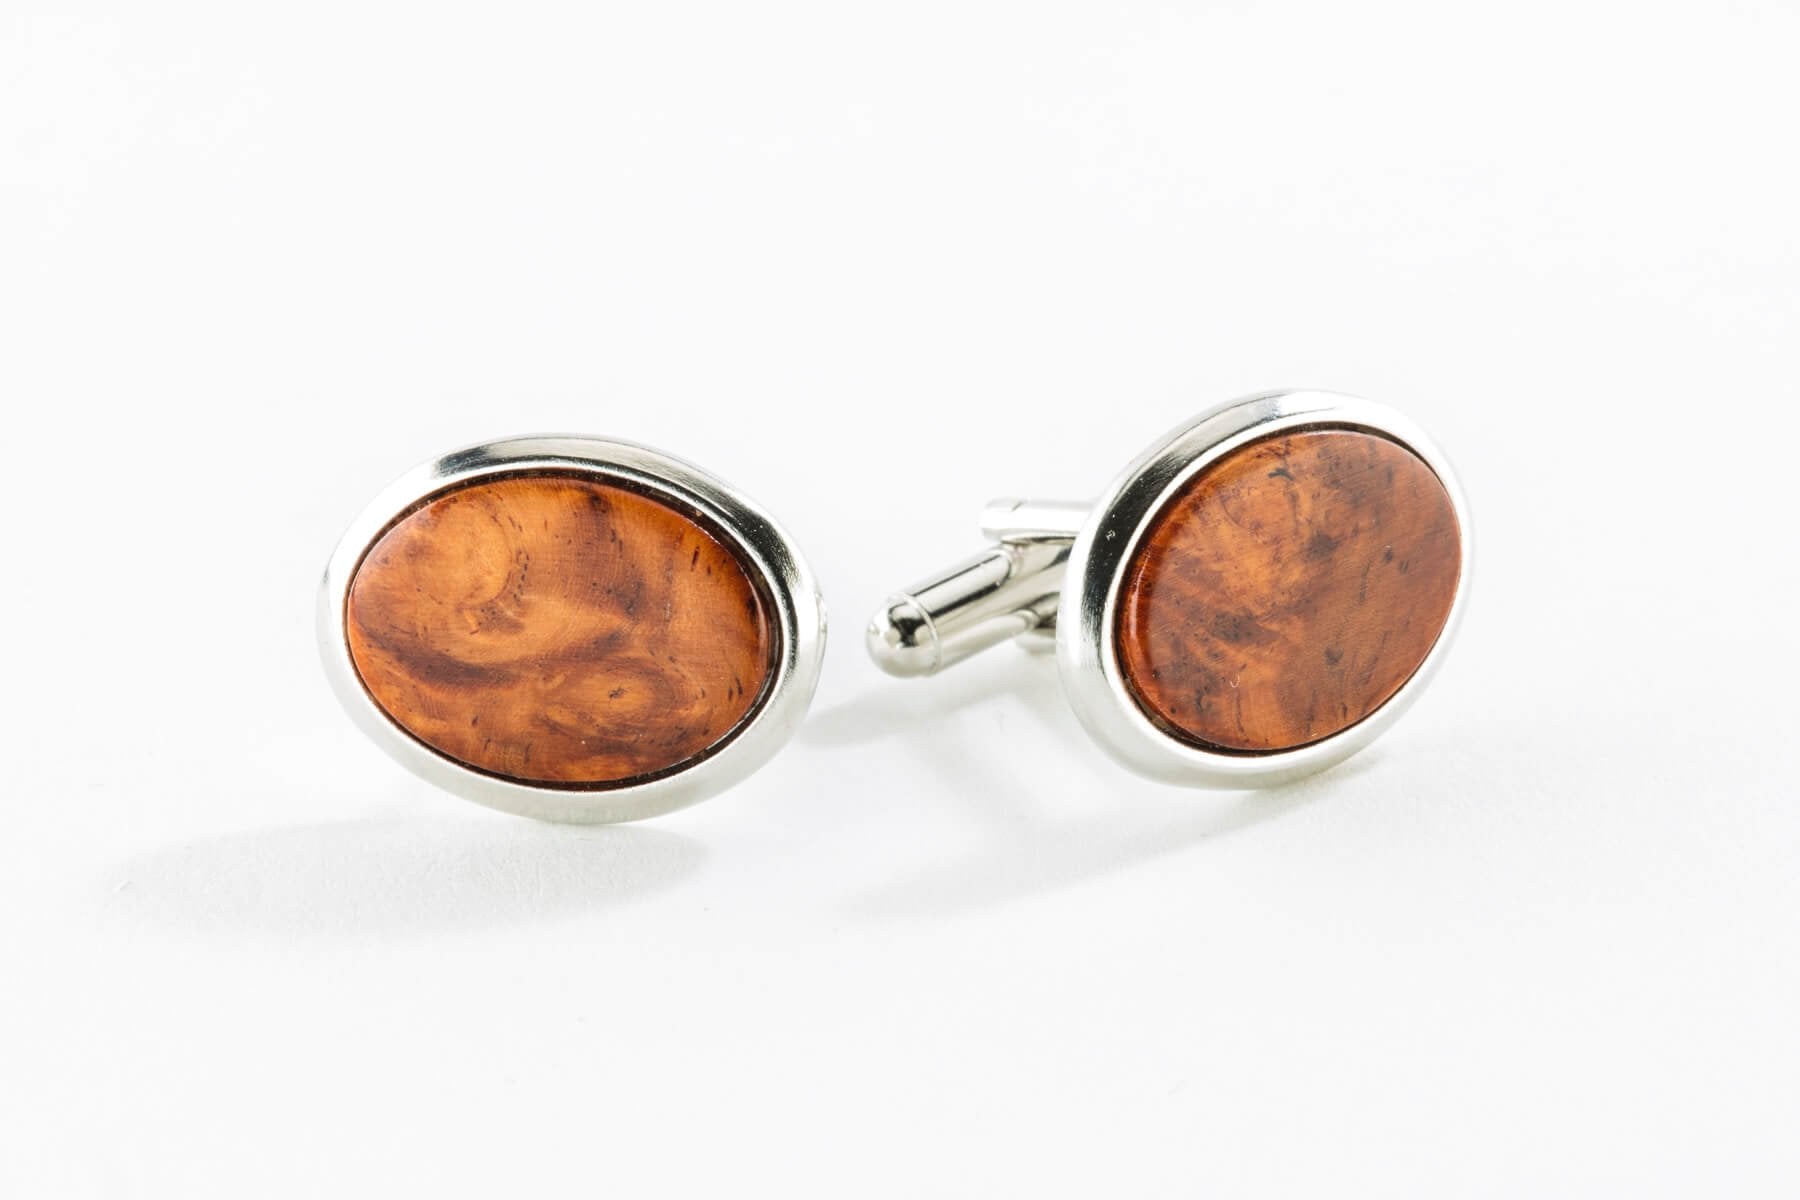 Oval Solid Cuff Link